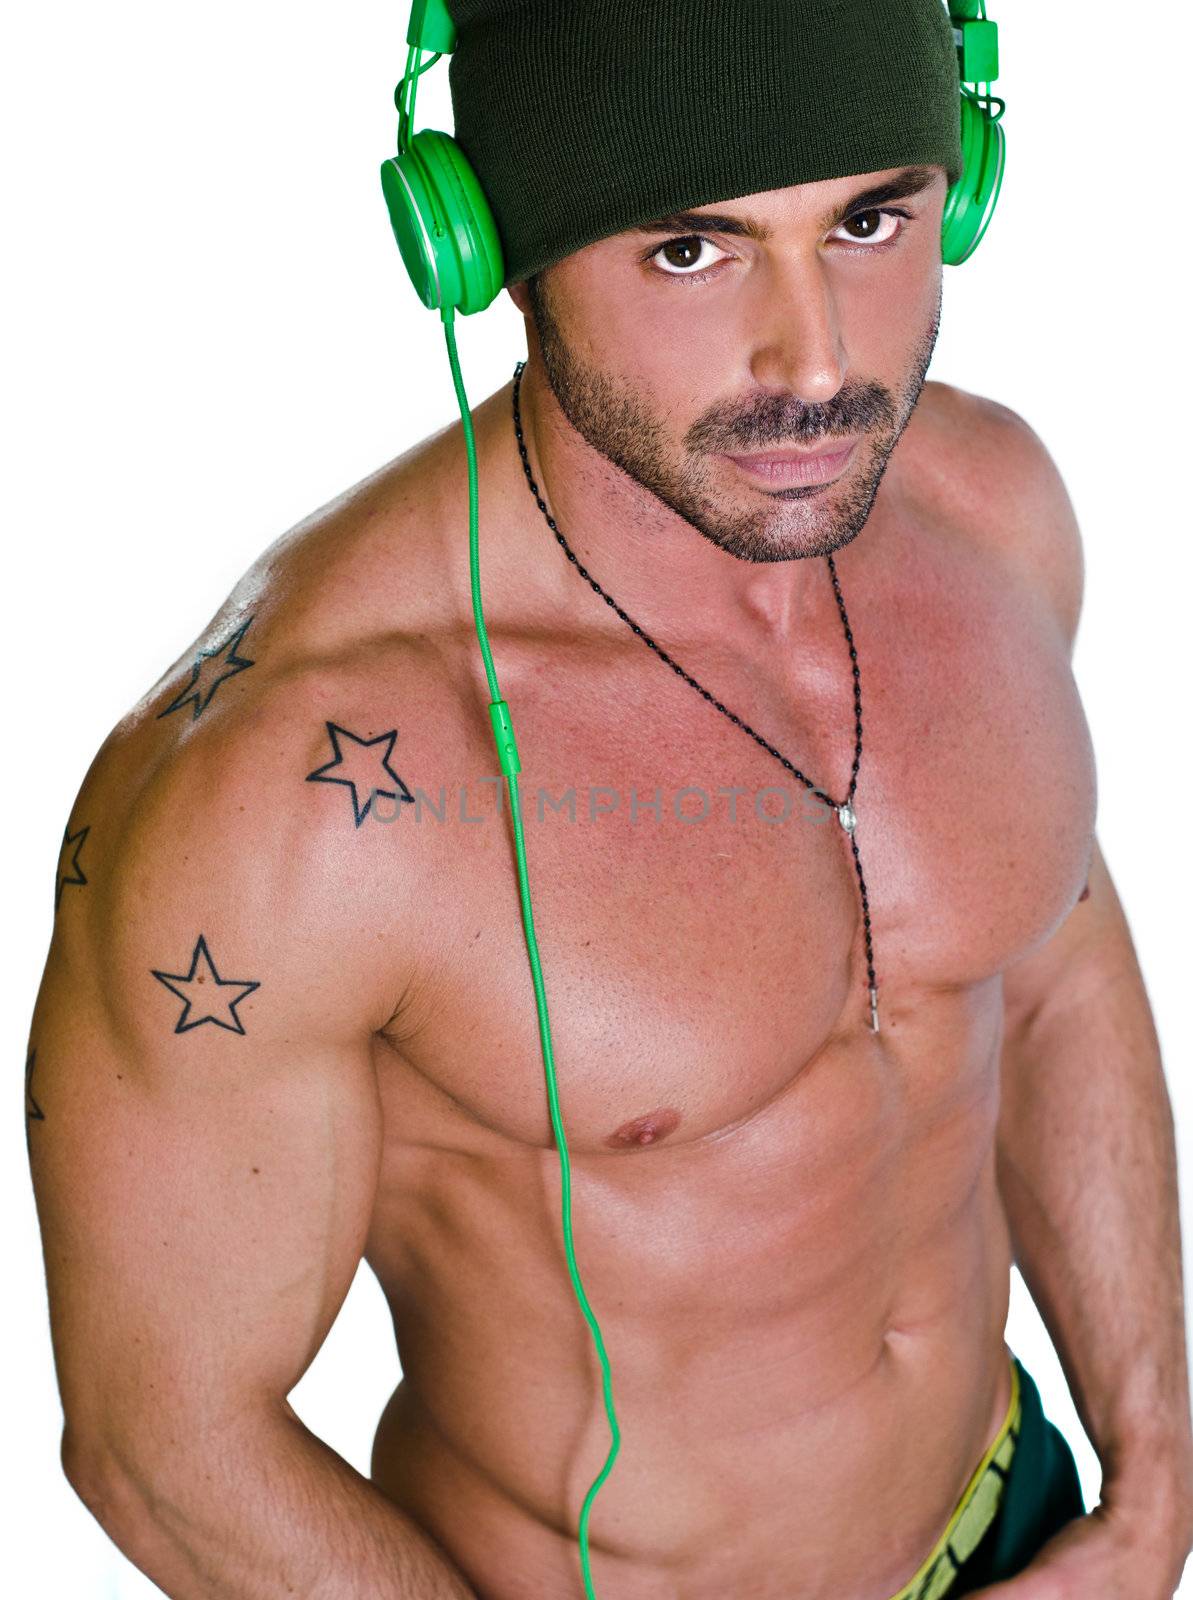 Muscular, athletic, tanned and shirtless man with headphones, isolated on white